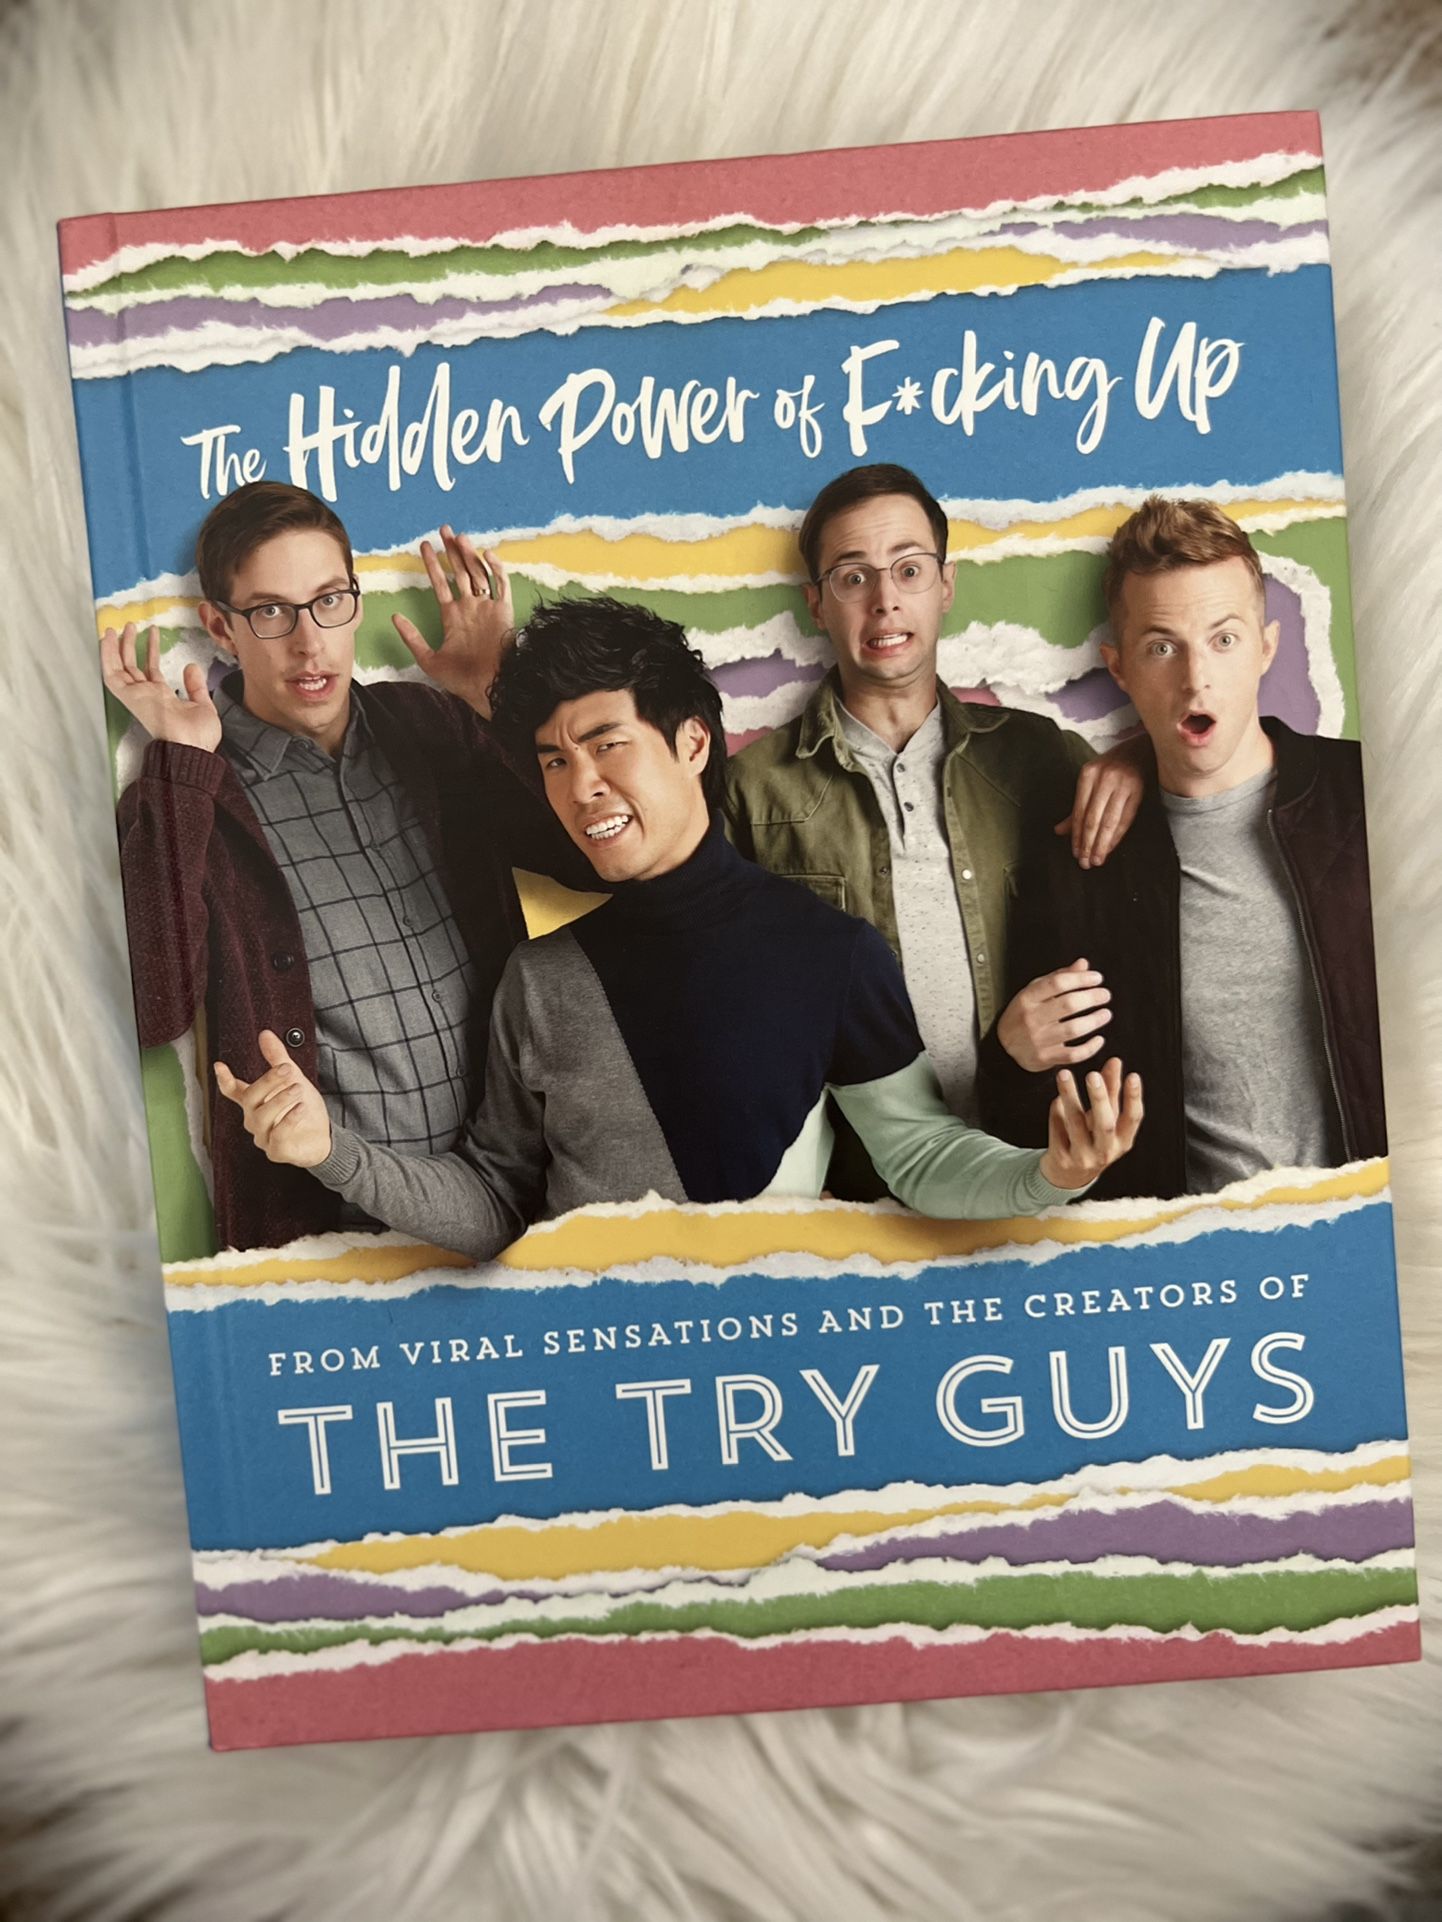 The Try Guys Book - “The Hidden Power Of F*cking Up”